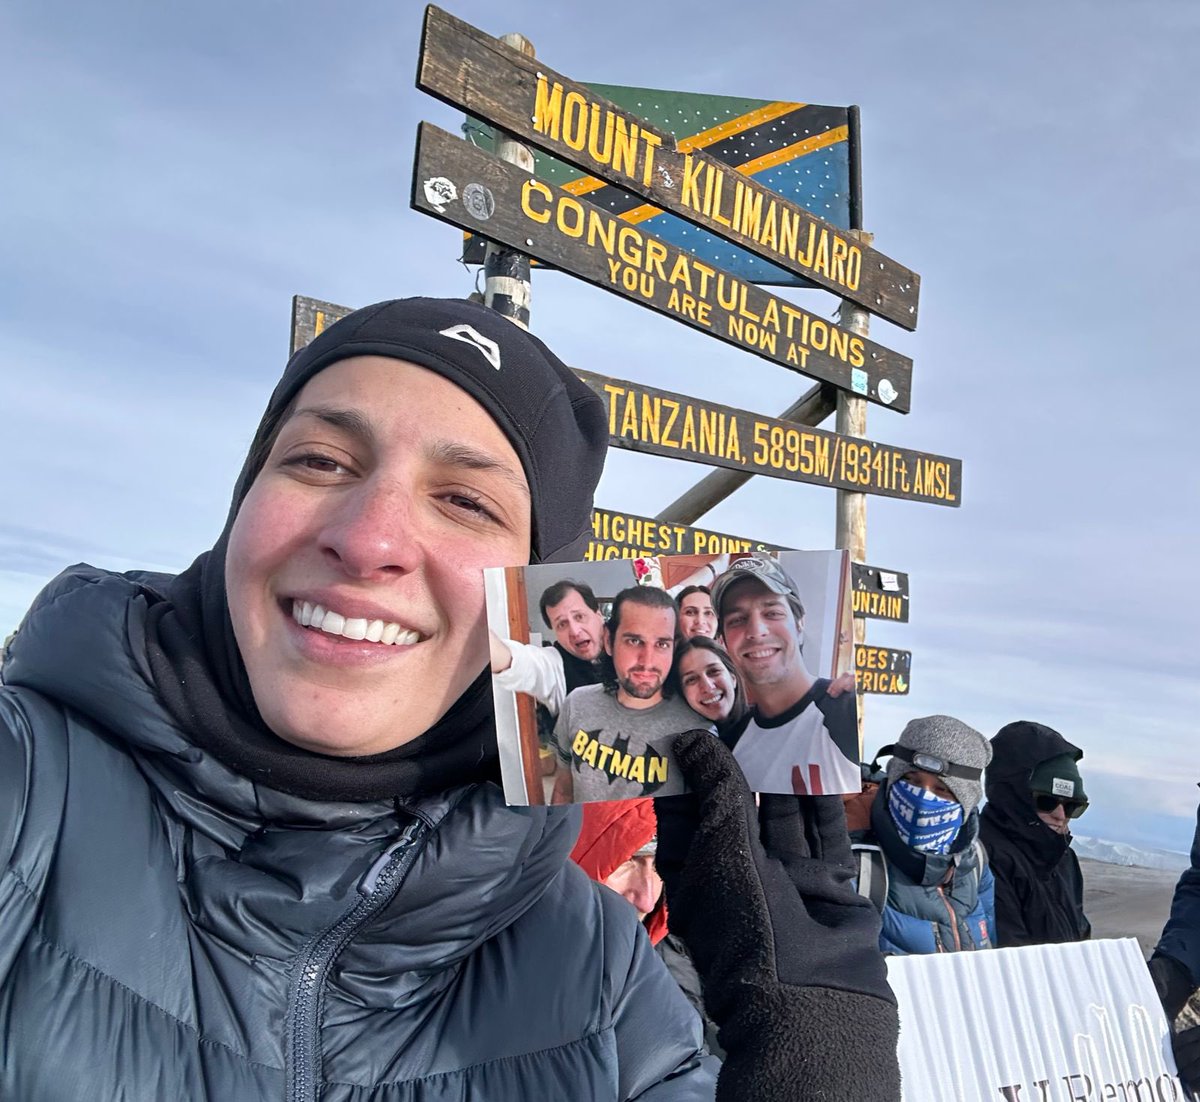 My sister Mrs Bhindi and her Husband Mr MeenooJaan have climbed to the top of Mount Kilimanjaro on her birthday with my first selfy from 2016 after escaping the Taliban.